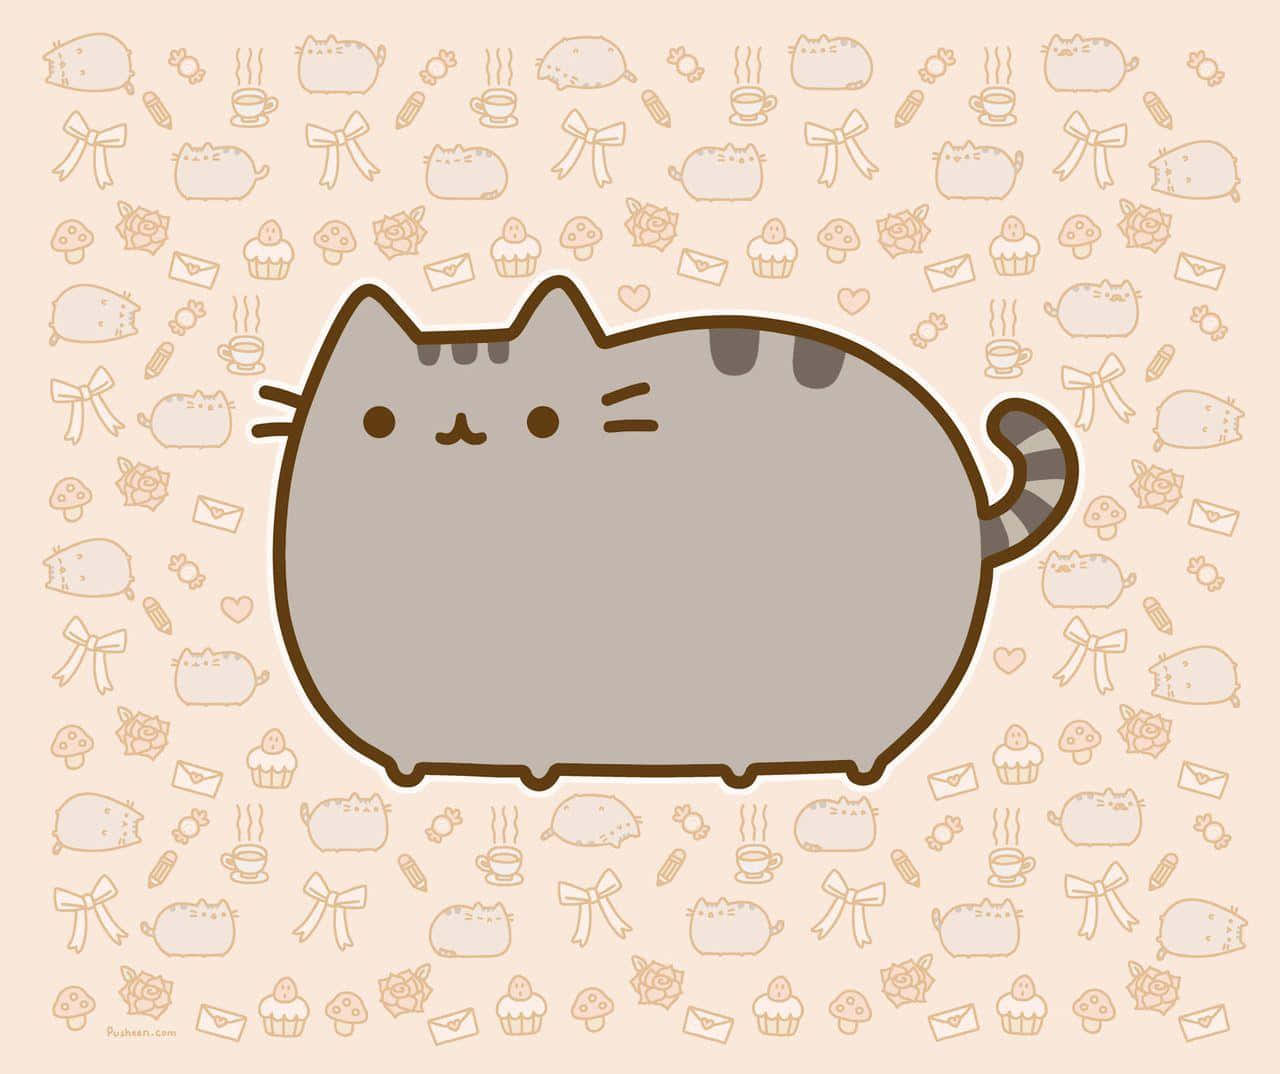 A pleasant afternoon with Pusheen